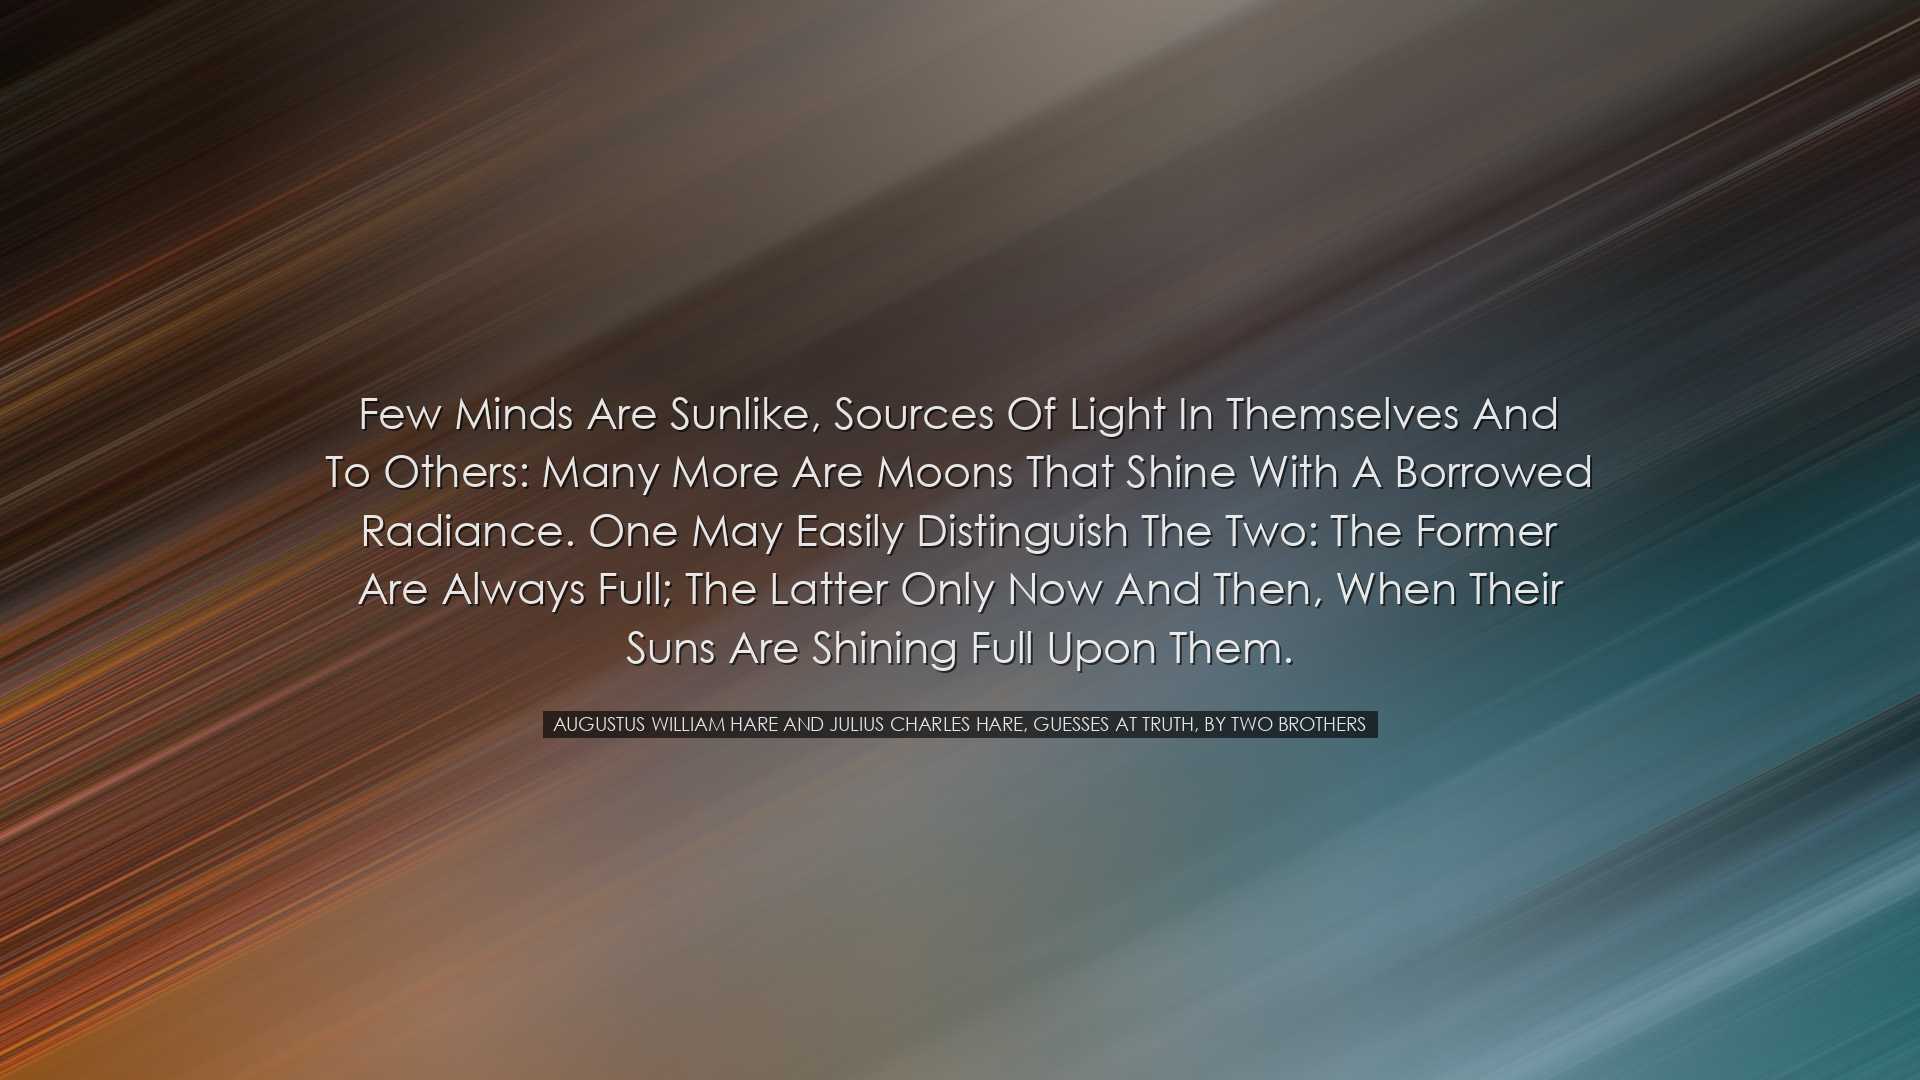 Few minds are sunlike, sources of light in themselves and to other